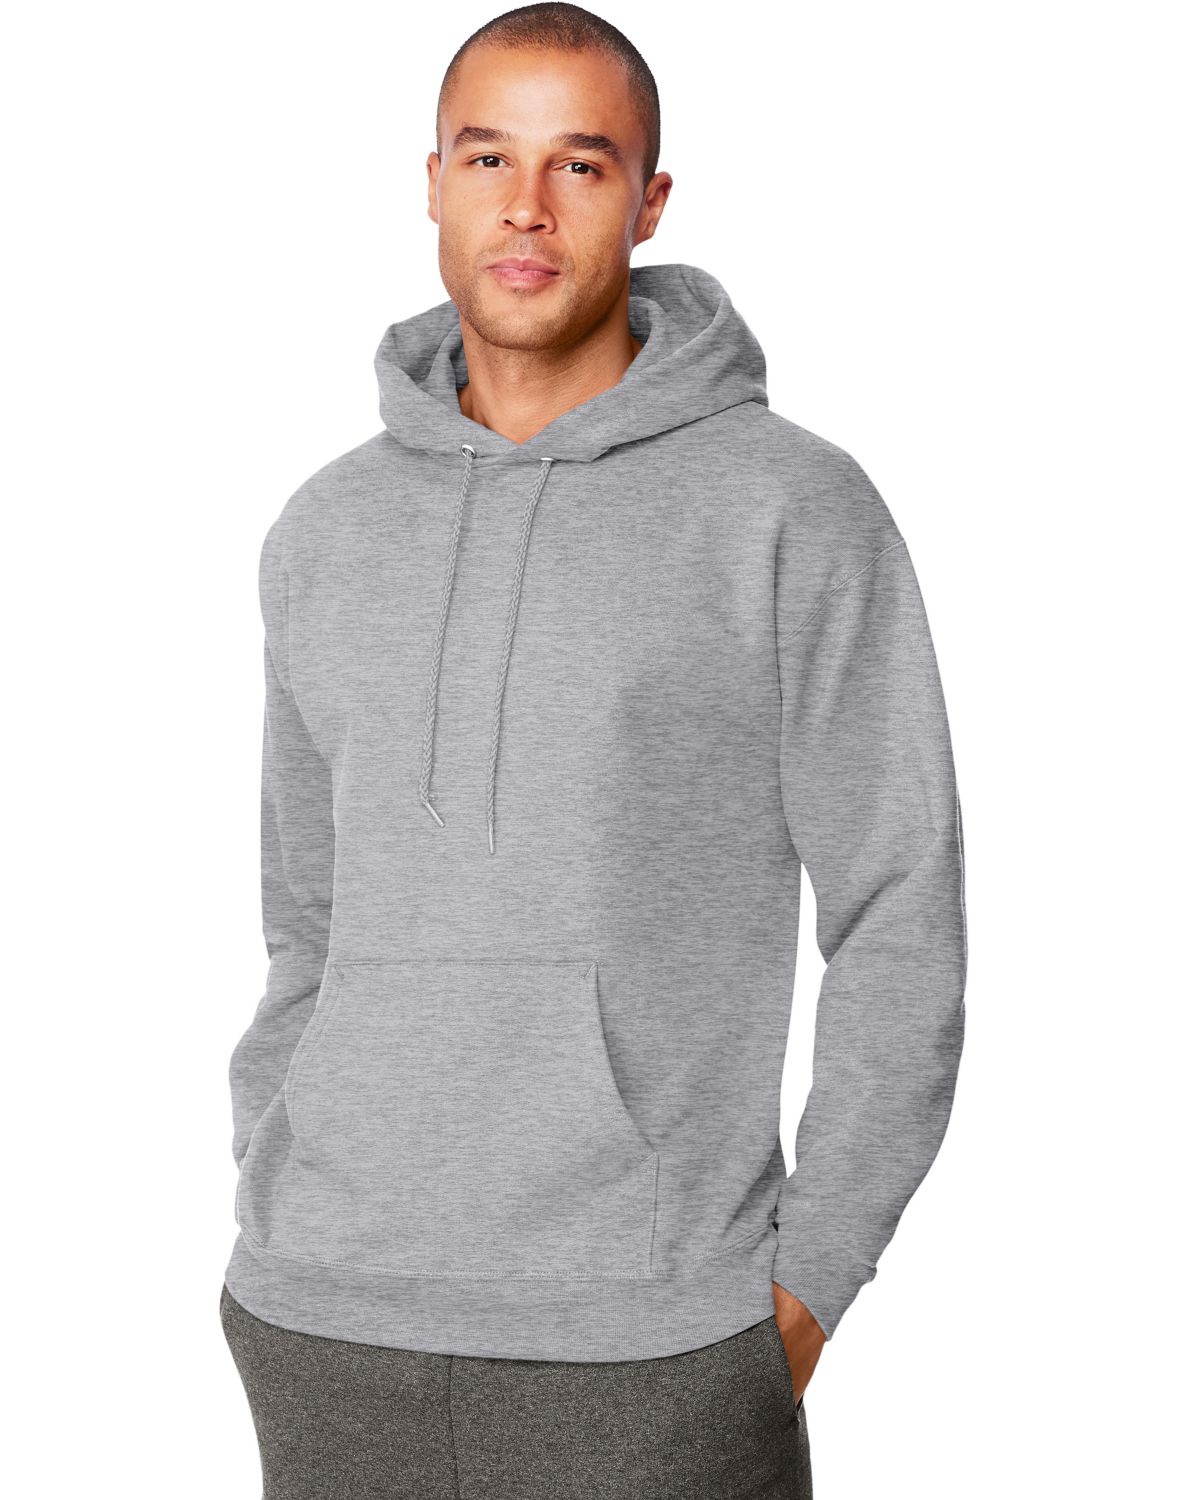 Hanes RS170 Adult Perfect Sweats Pullover Hoodie 